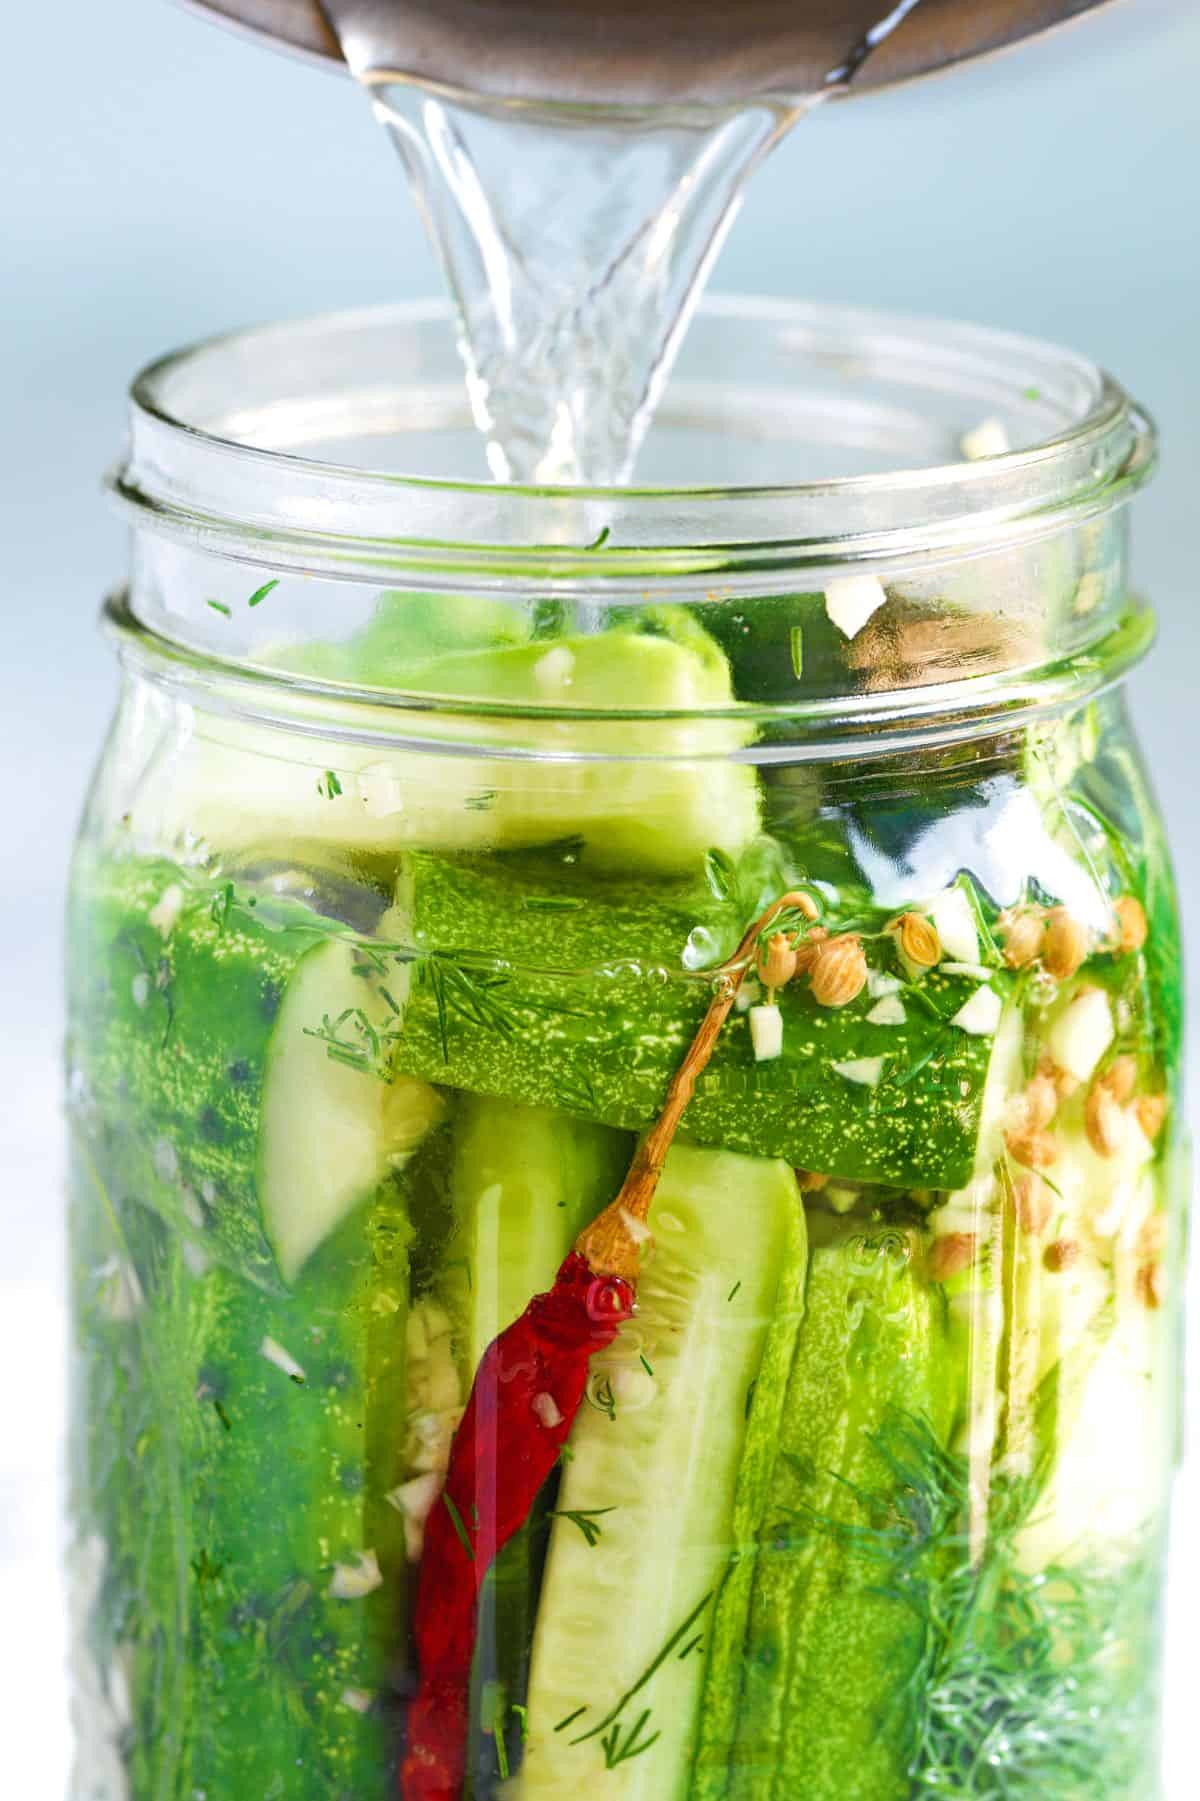 Making Homemade Pickles -- Adding brine to the jar of cucumbers